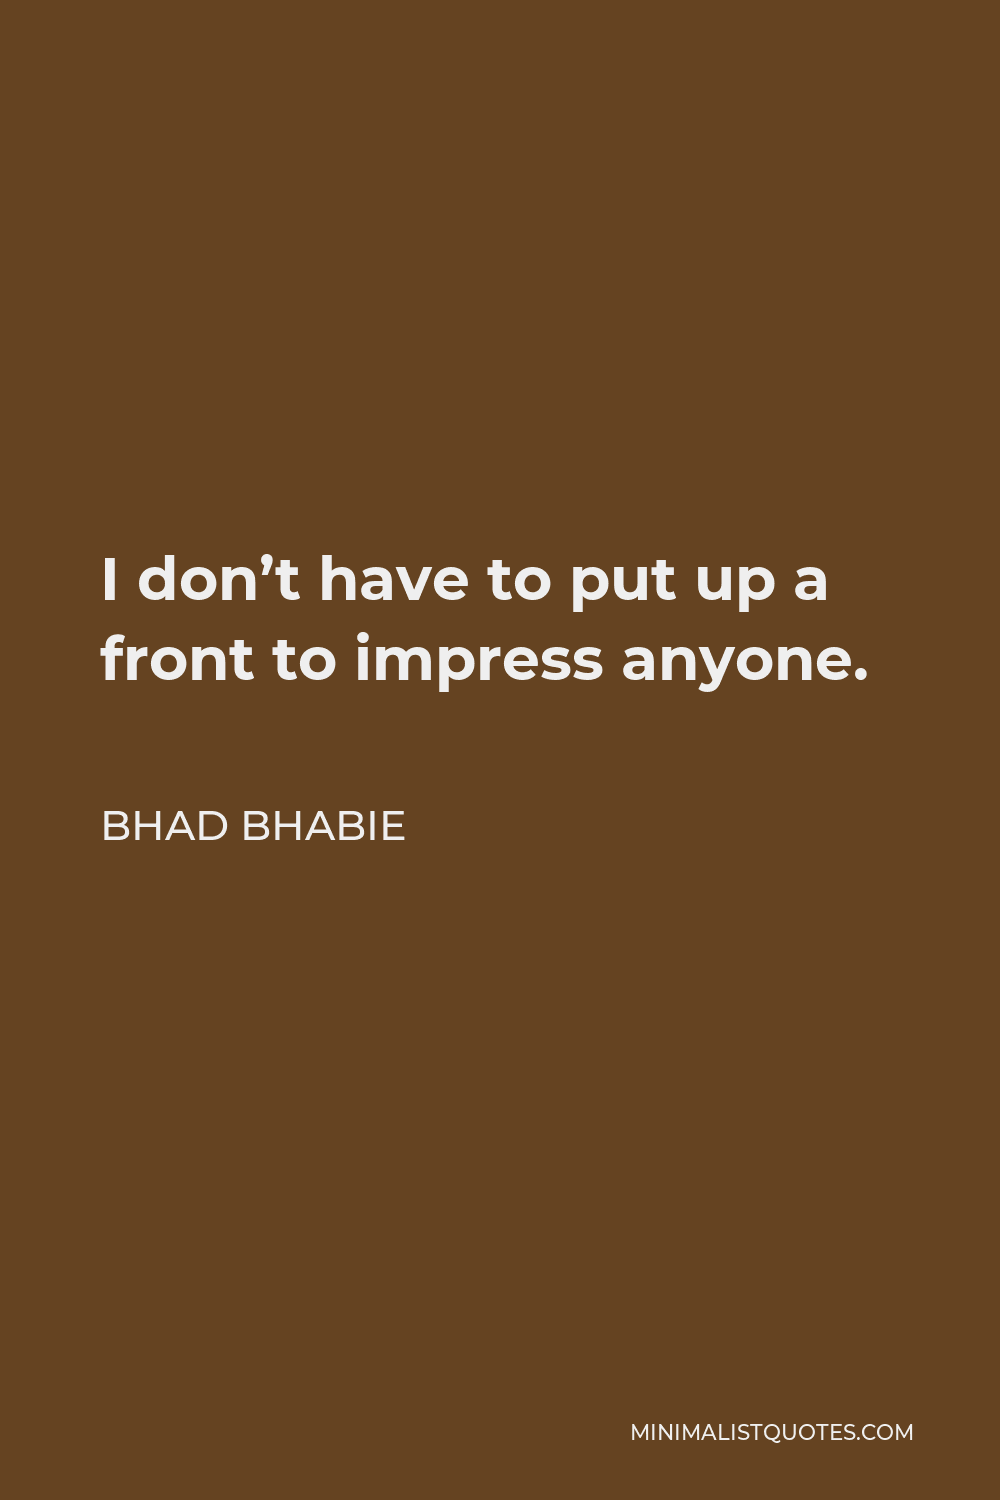 Bhad Bhabie Quote - I don’t have to put up a front to impress anyone.